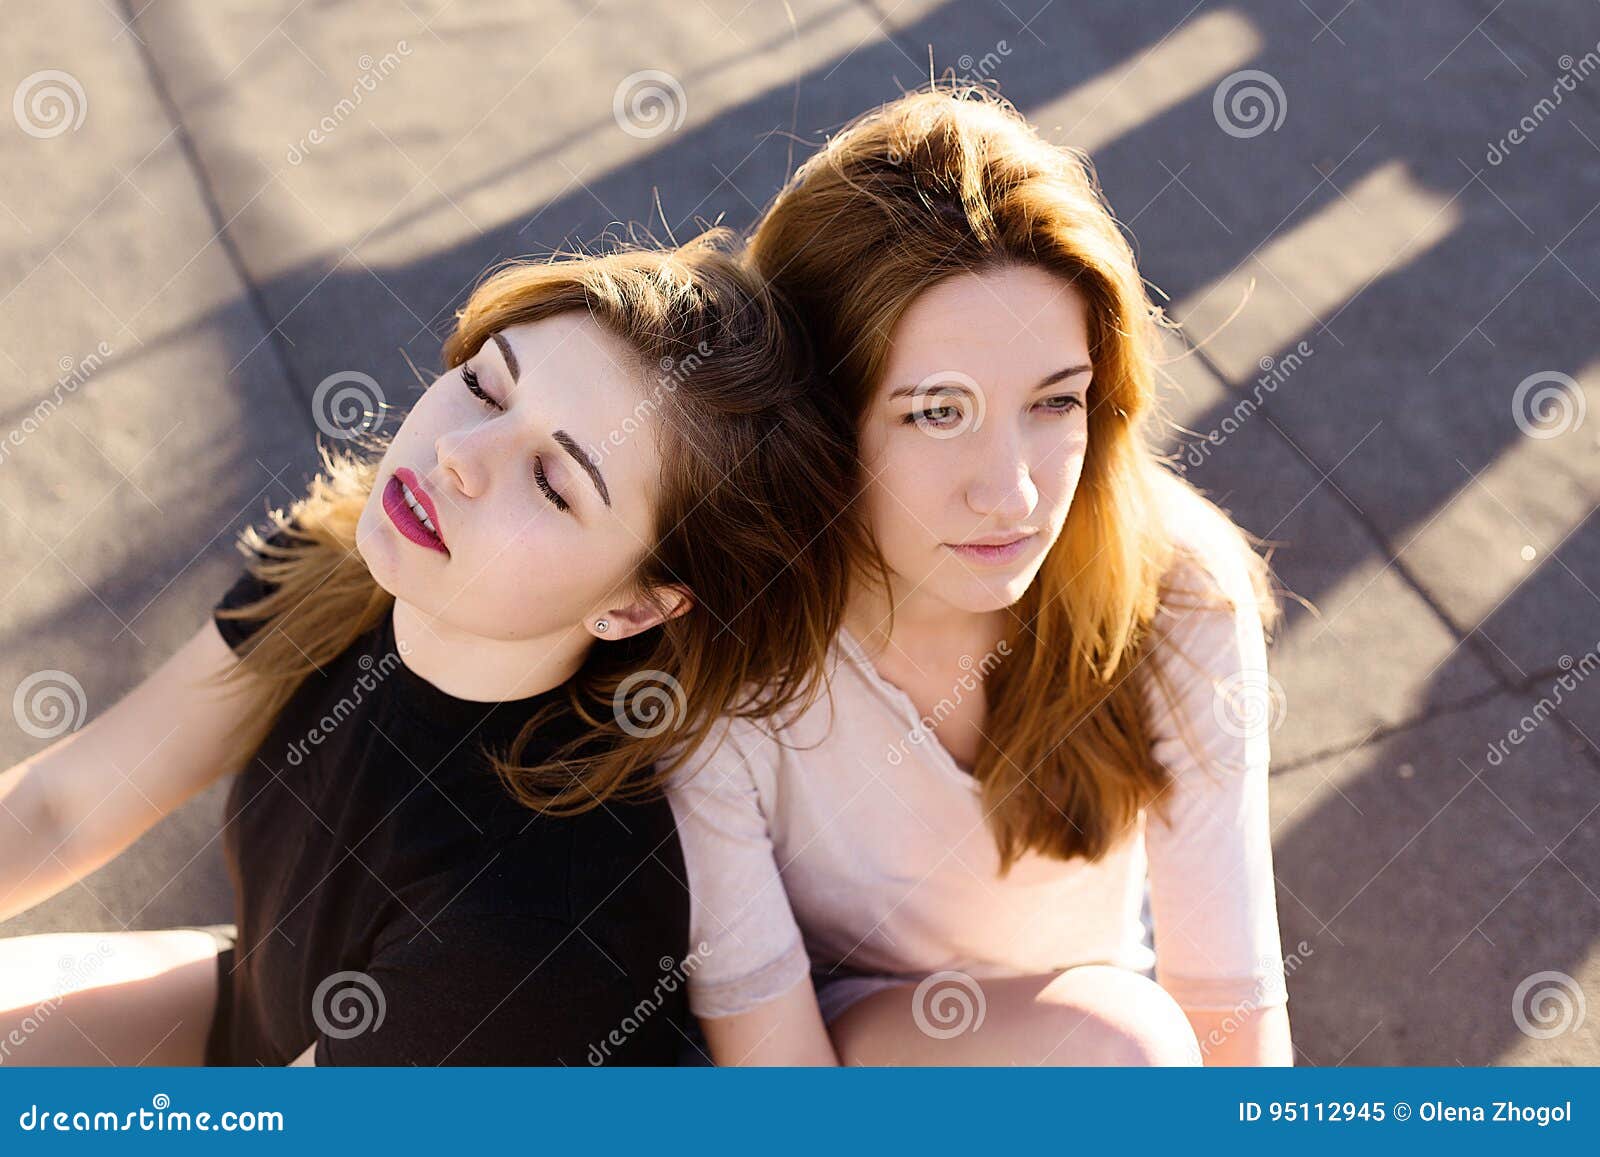 Portrait Of Two Girlfriends On The Roof Stock Image Image Of Performer Portrait 95112945 